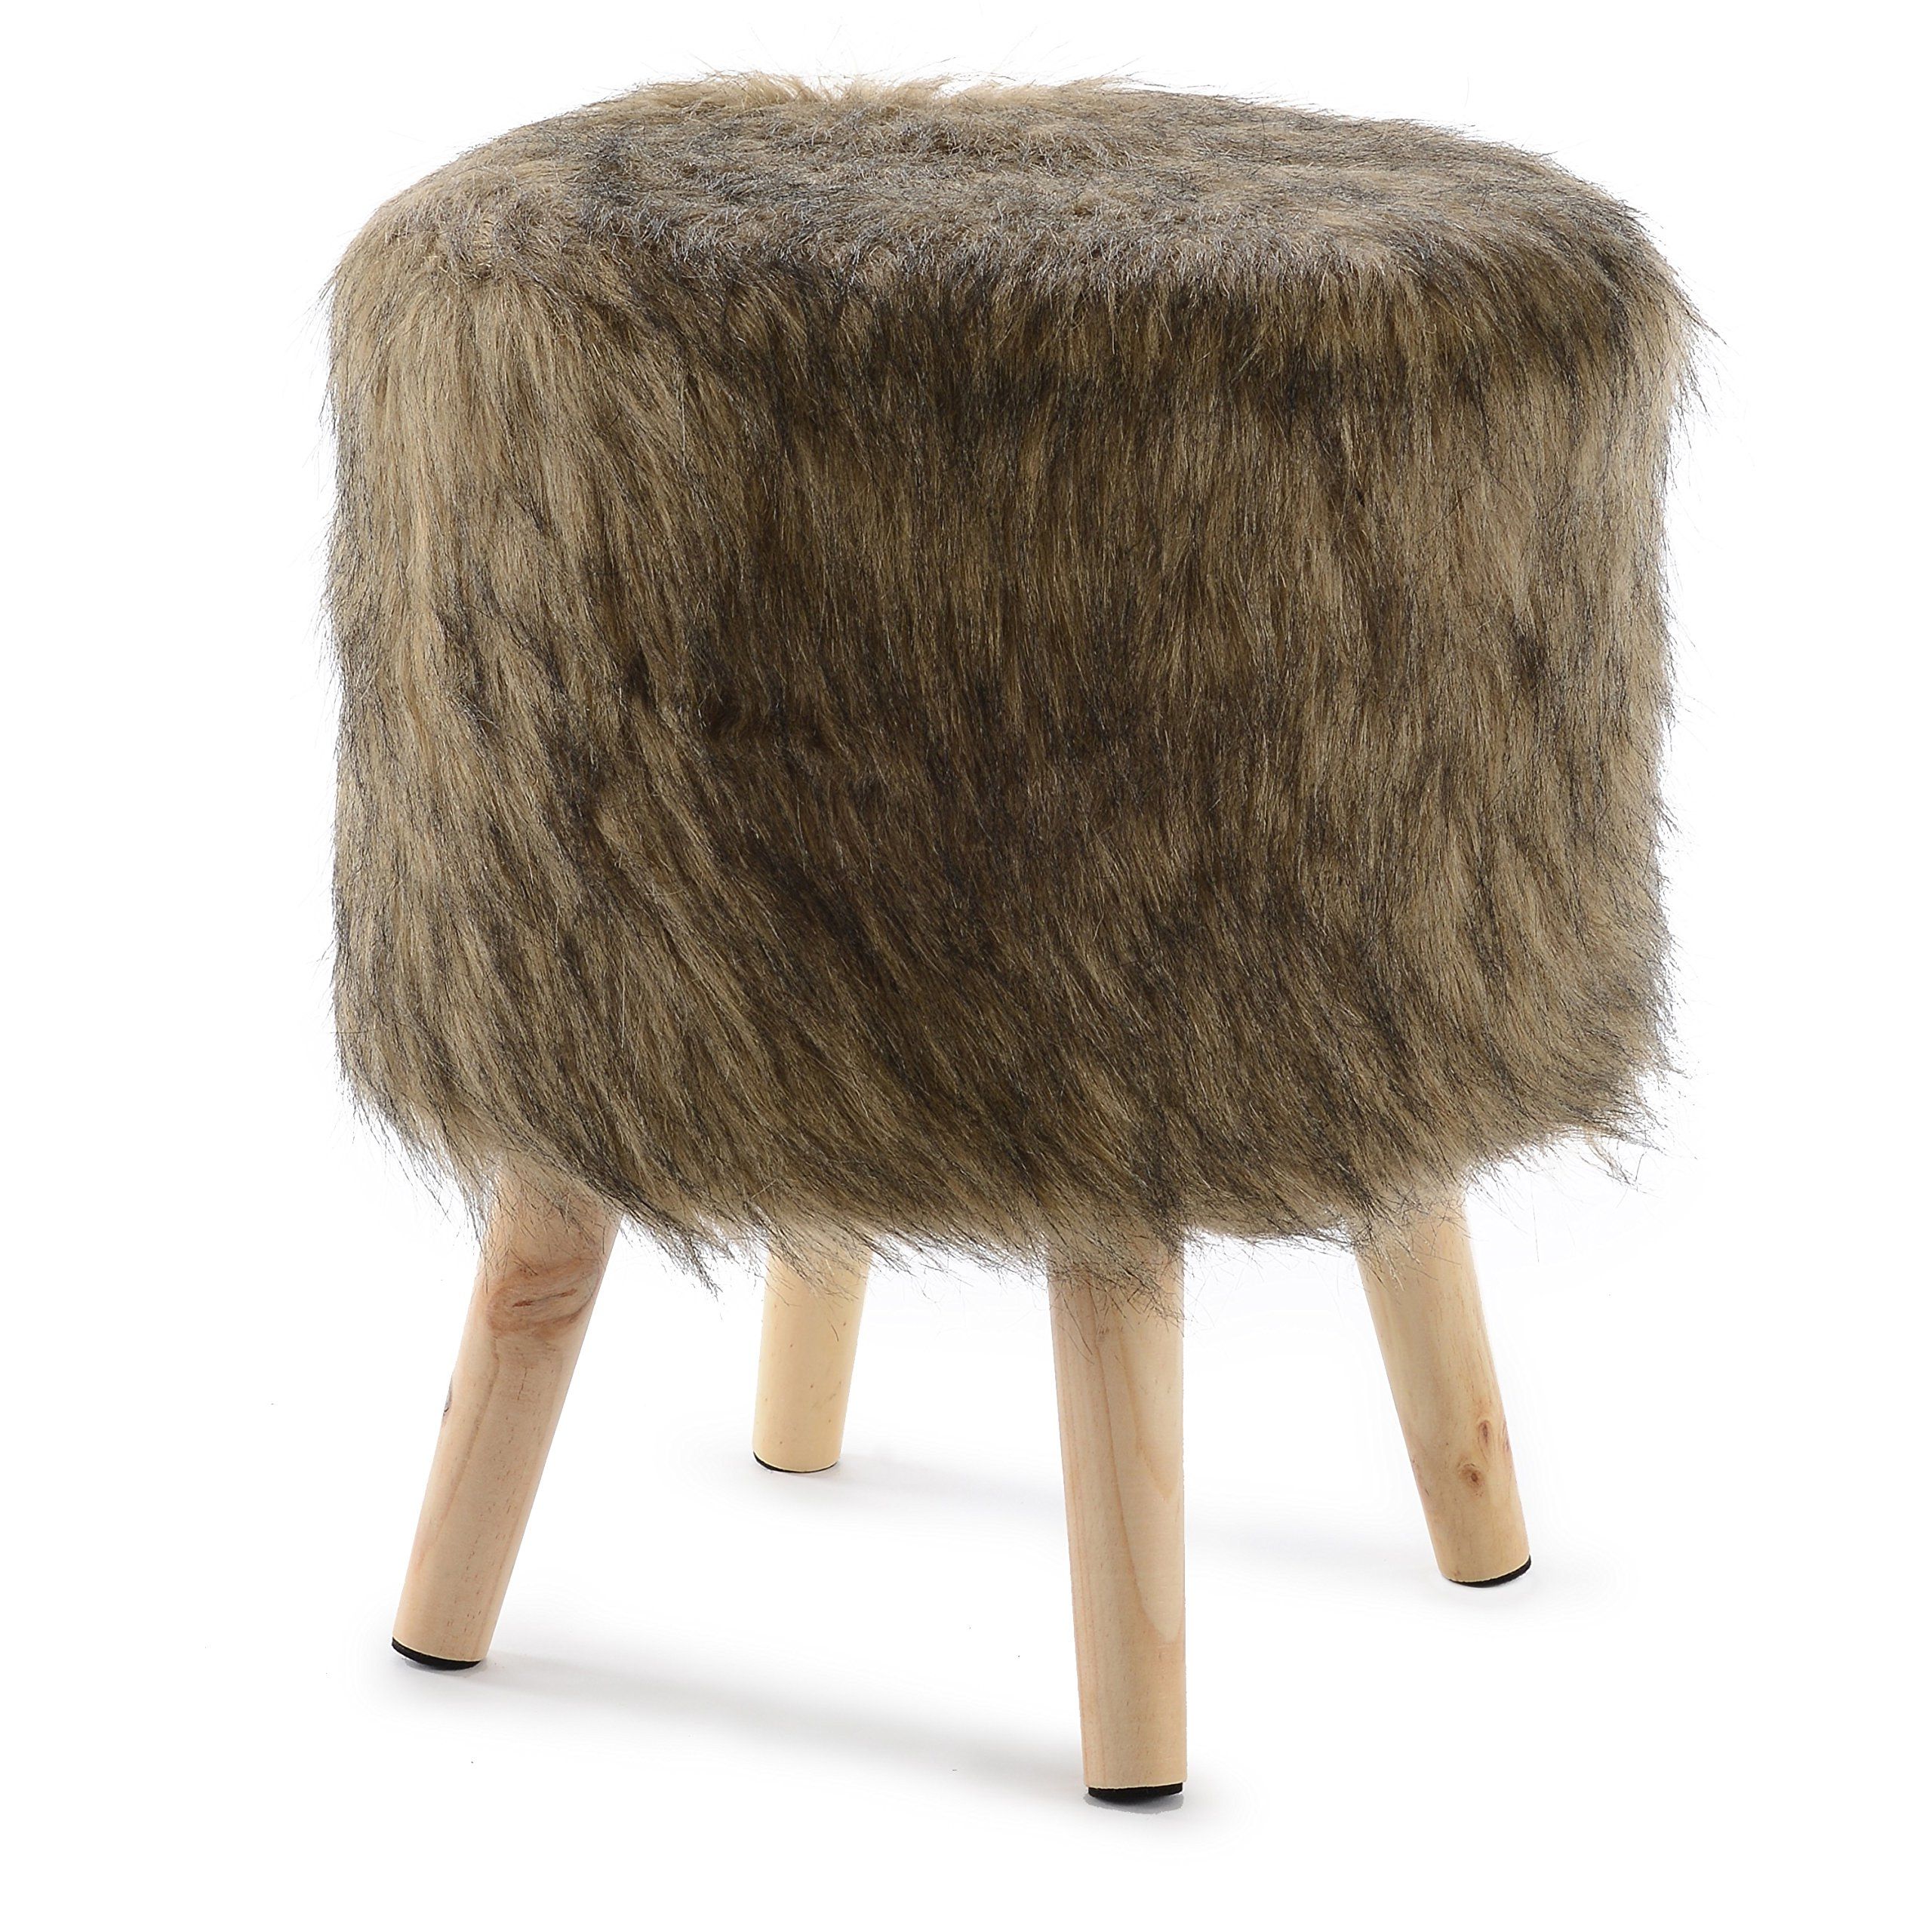 Super Soft Decorative Brown  Mink Faux Fur Foot Stool With Wood Legs : Home & Kitchen (View 8 of 10)